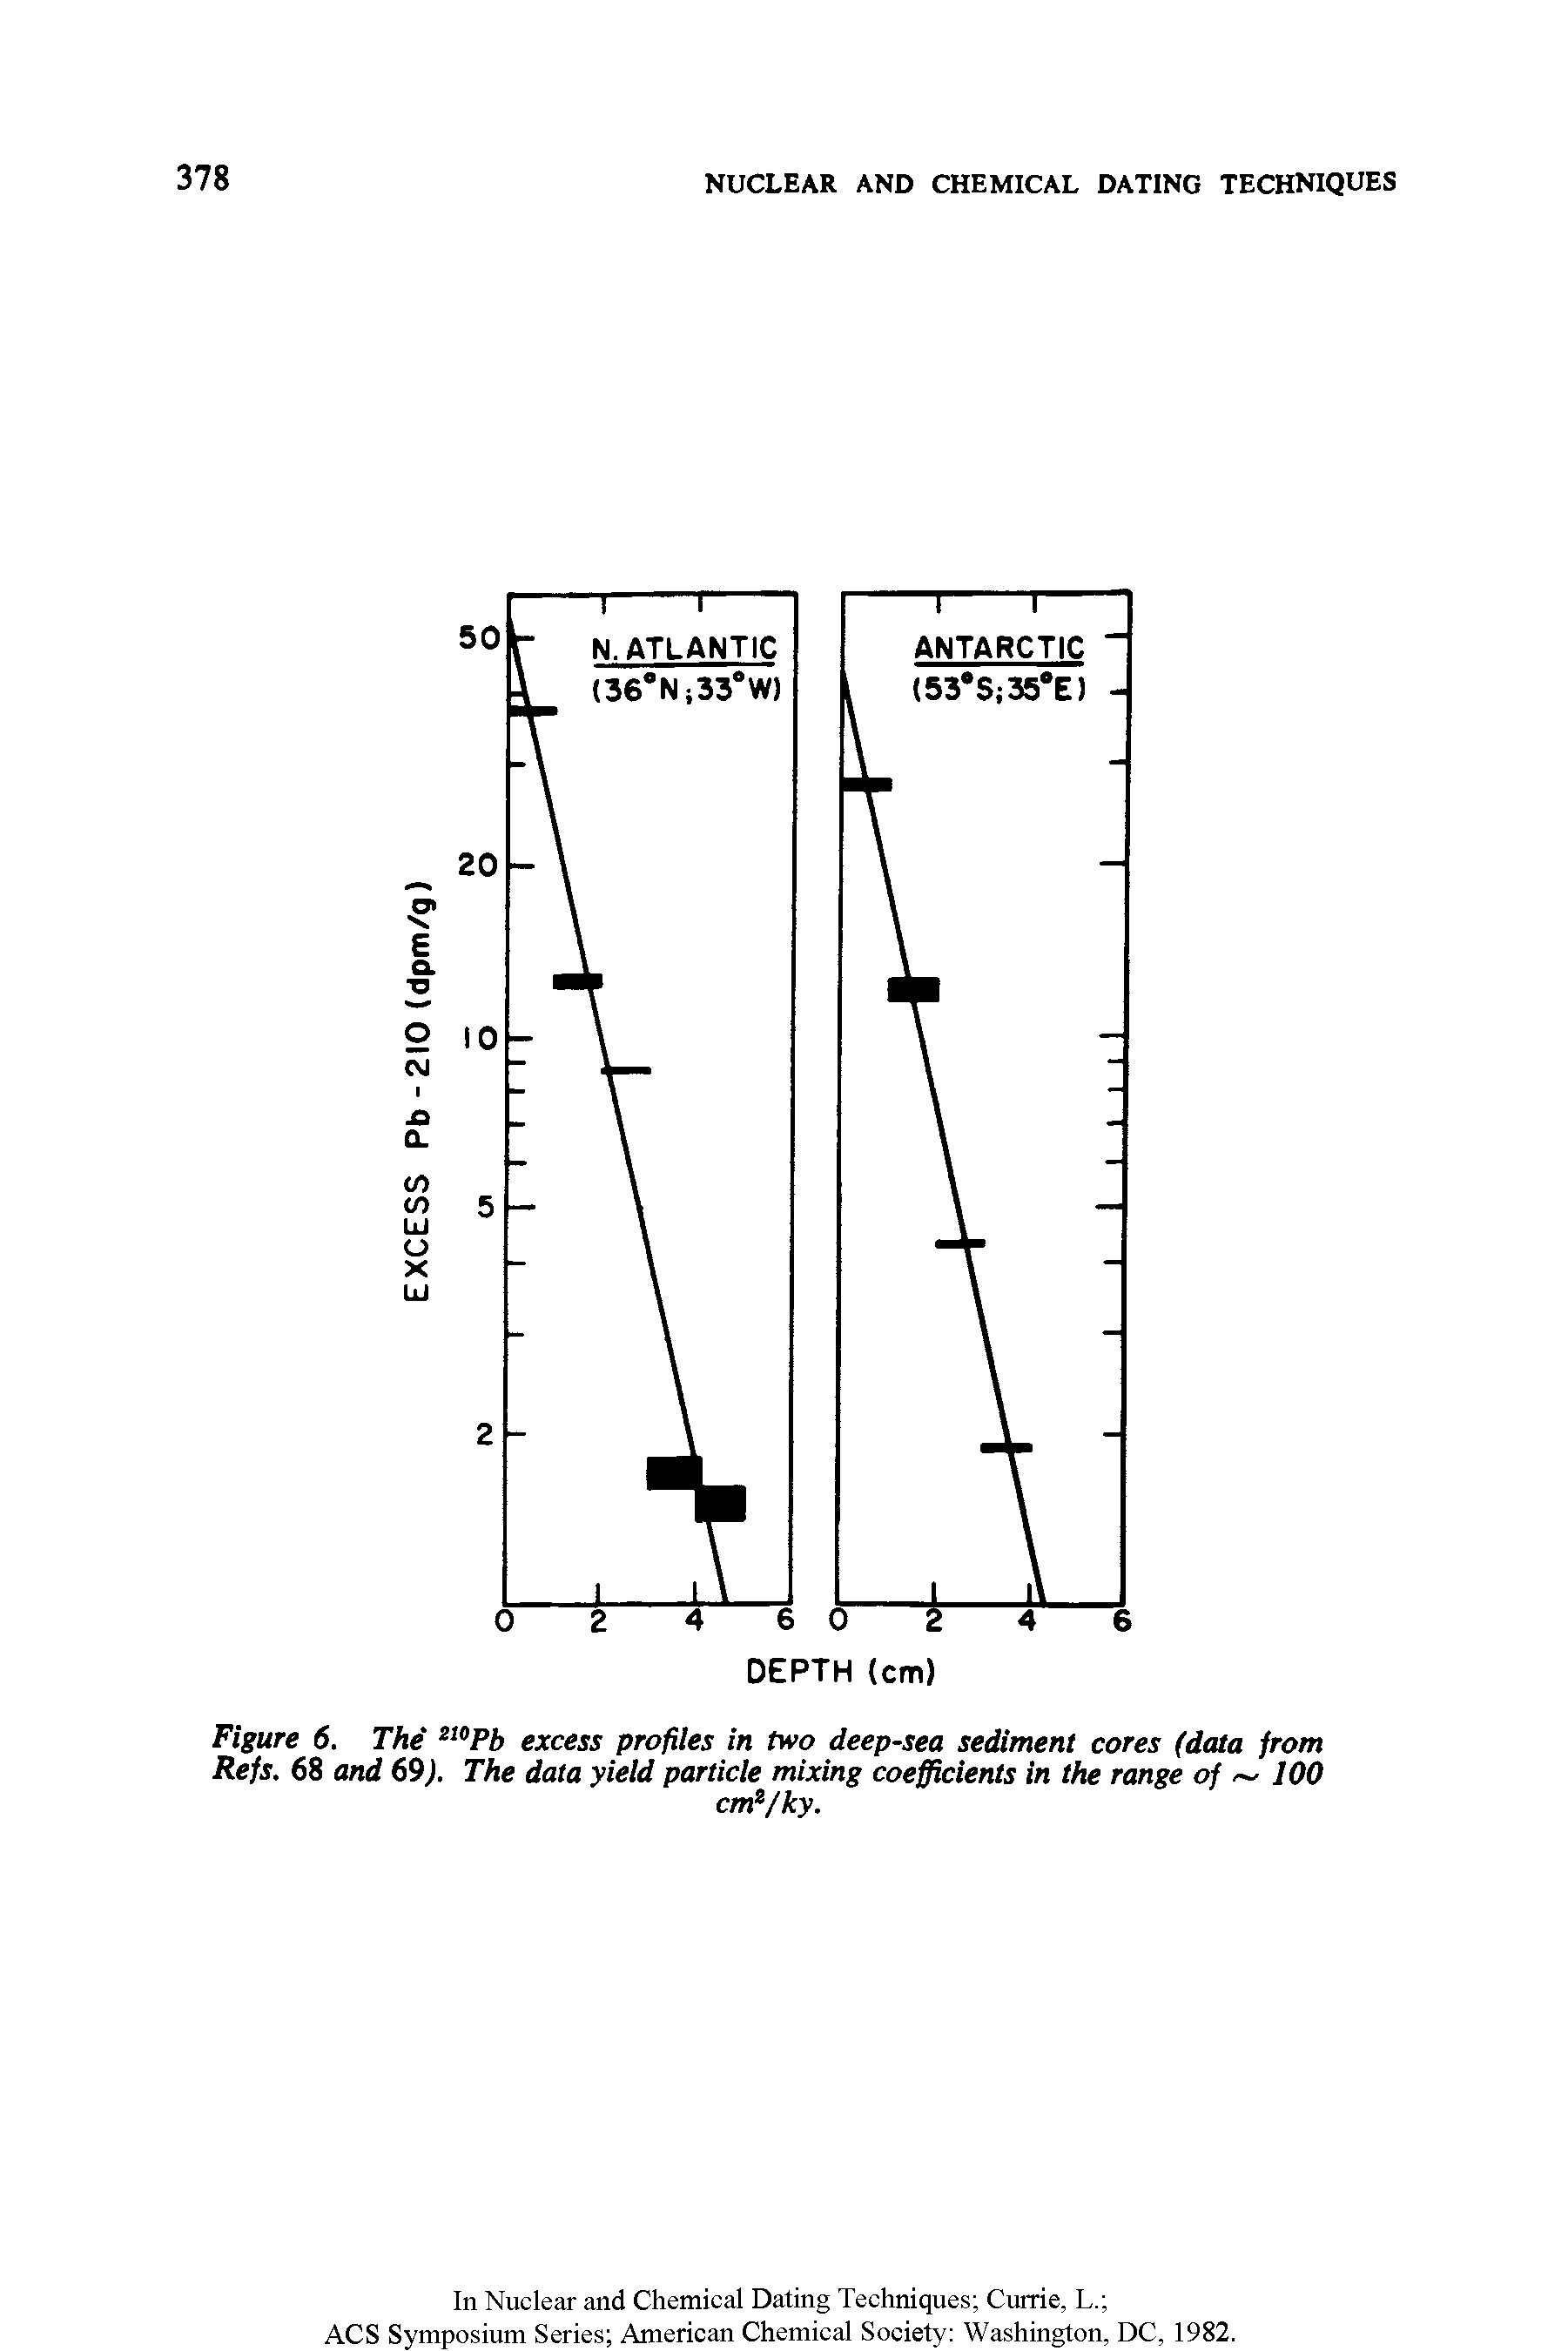 Figure 6. The 2I0Pb excess profiles in two deep-sea sediment cores (data from Refs. 68 and 69). The data yield particle mixing coefficients in the range of 100...